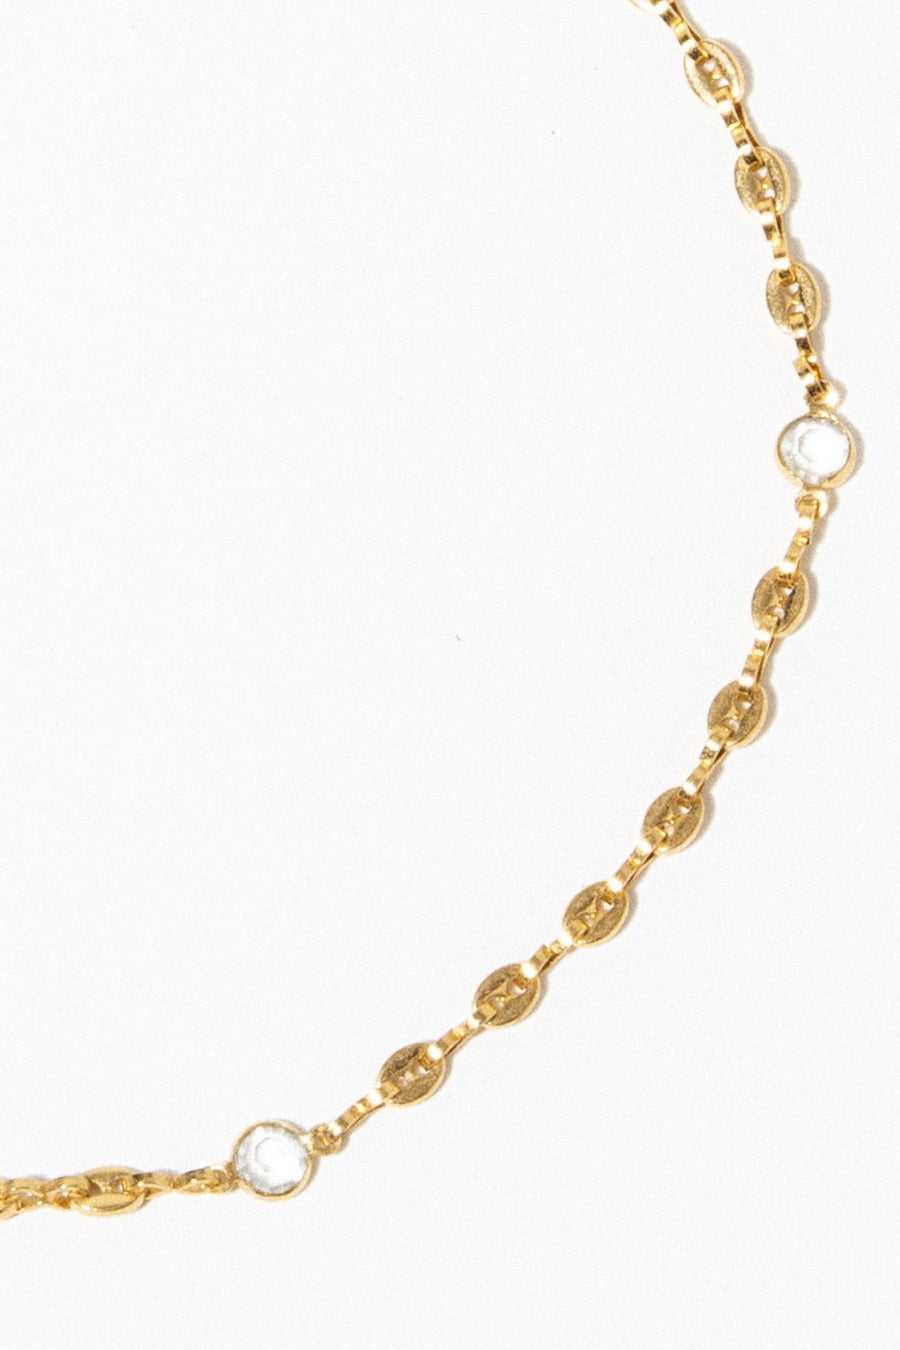 Goddess Jewelry Gold / 11 Inches The Tamara Necklace